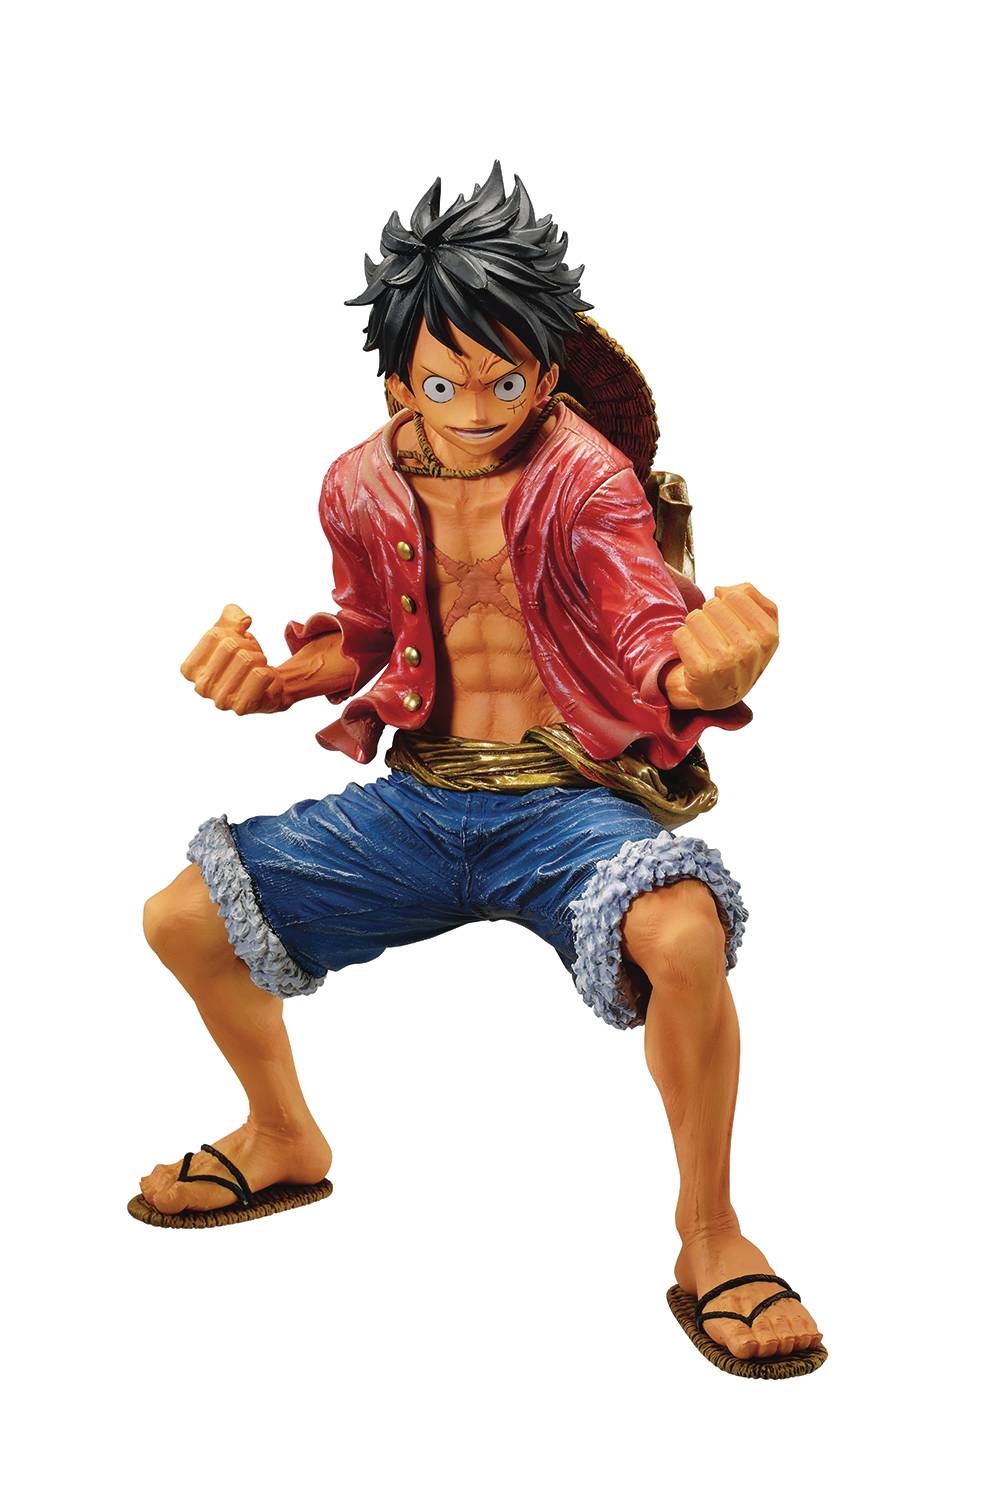 Collectible Statues :: Collectibles :: Figures :: Bandai Banpresto One Piece  - Chronicle King Of Artist The Sanji Figure